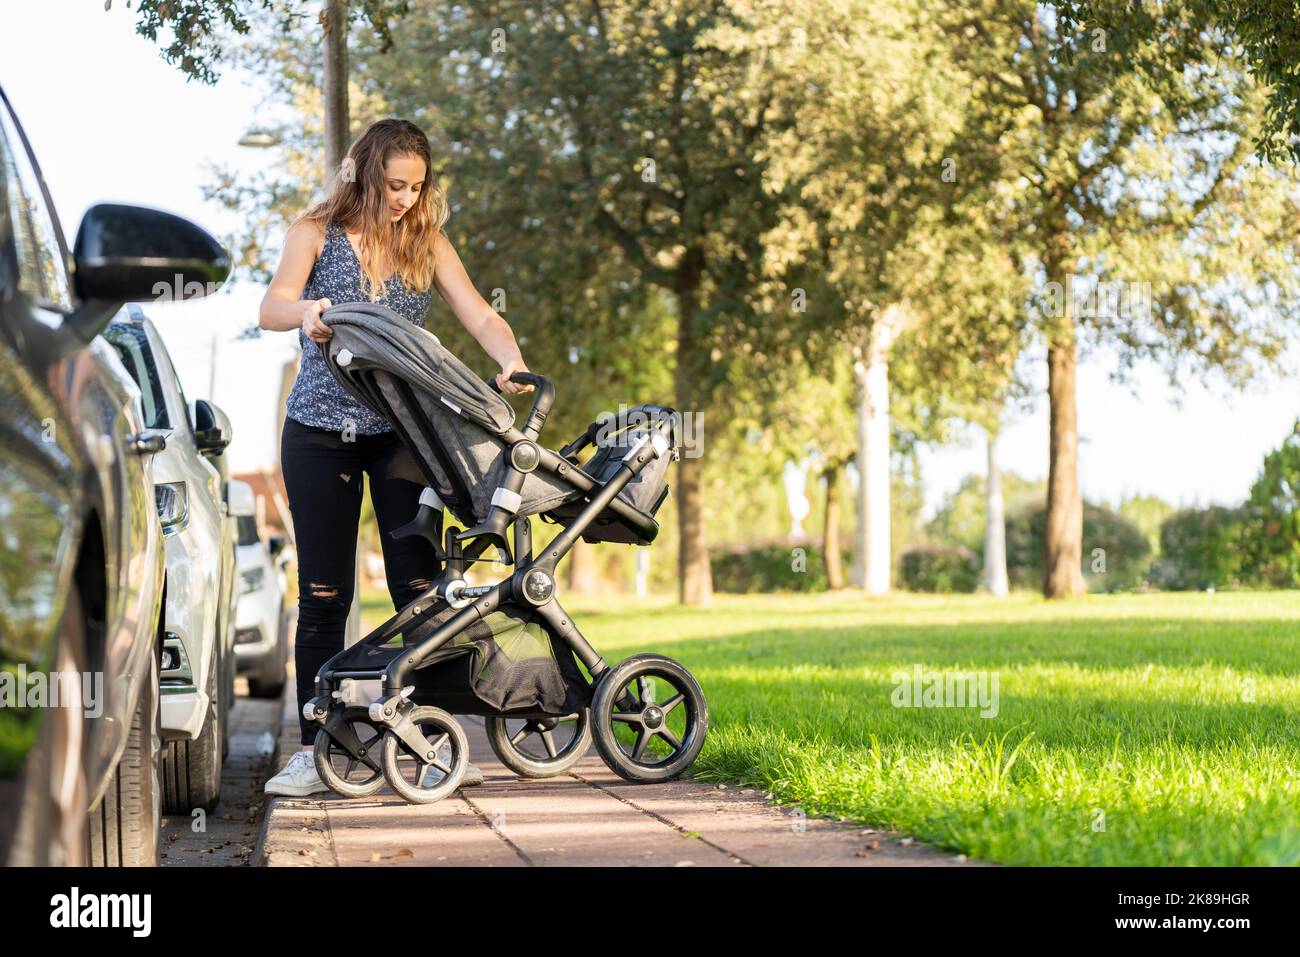 Mother preparing the baby stroller in the park after parking the car Stock Photo